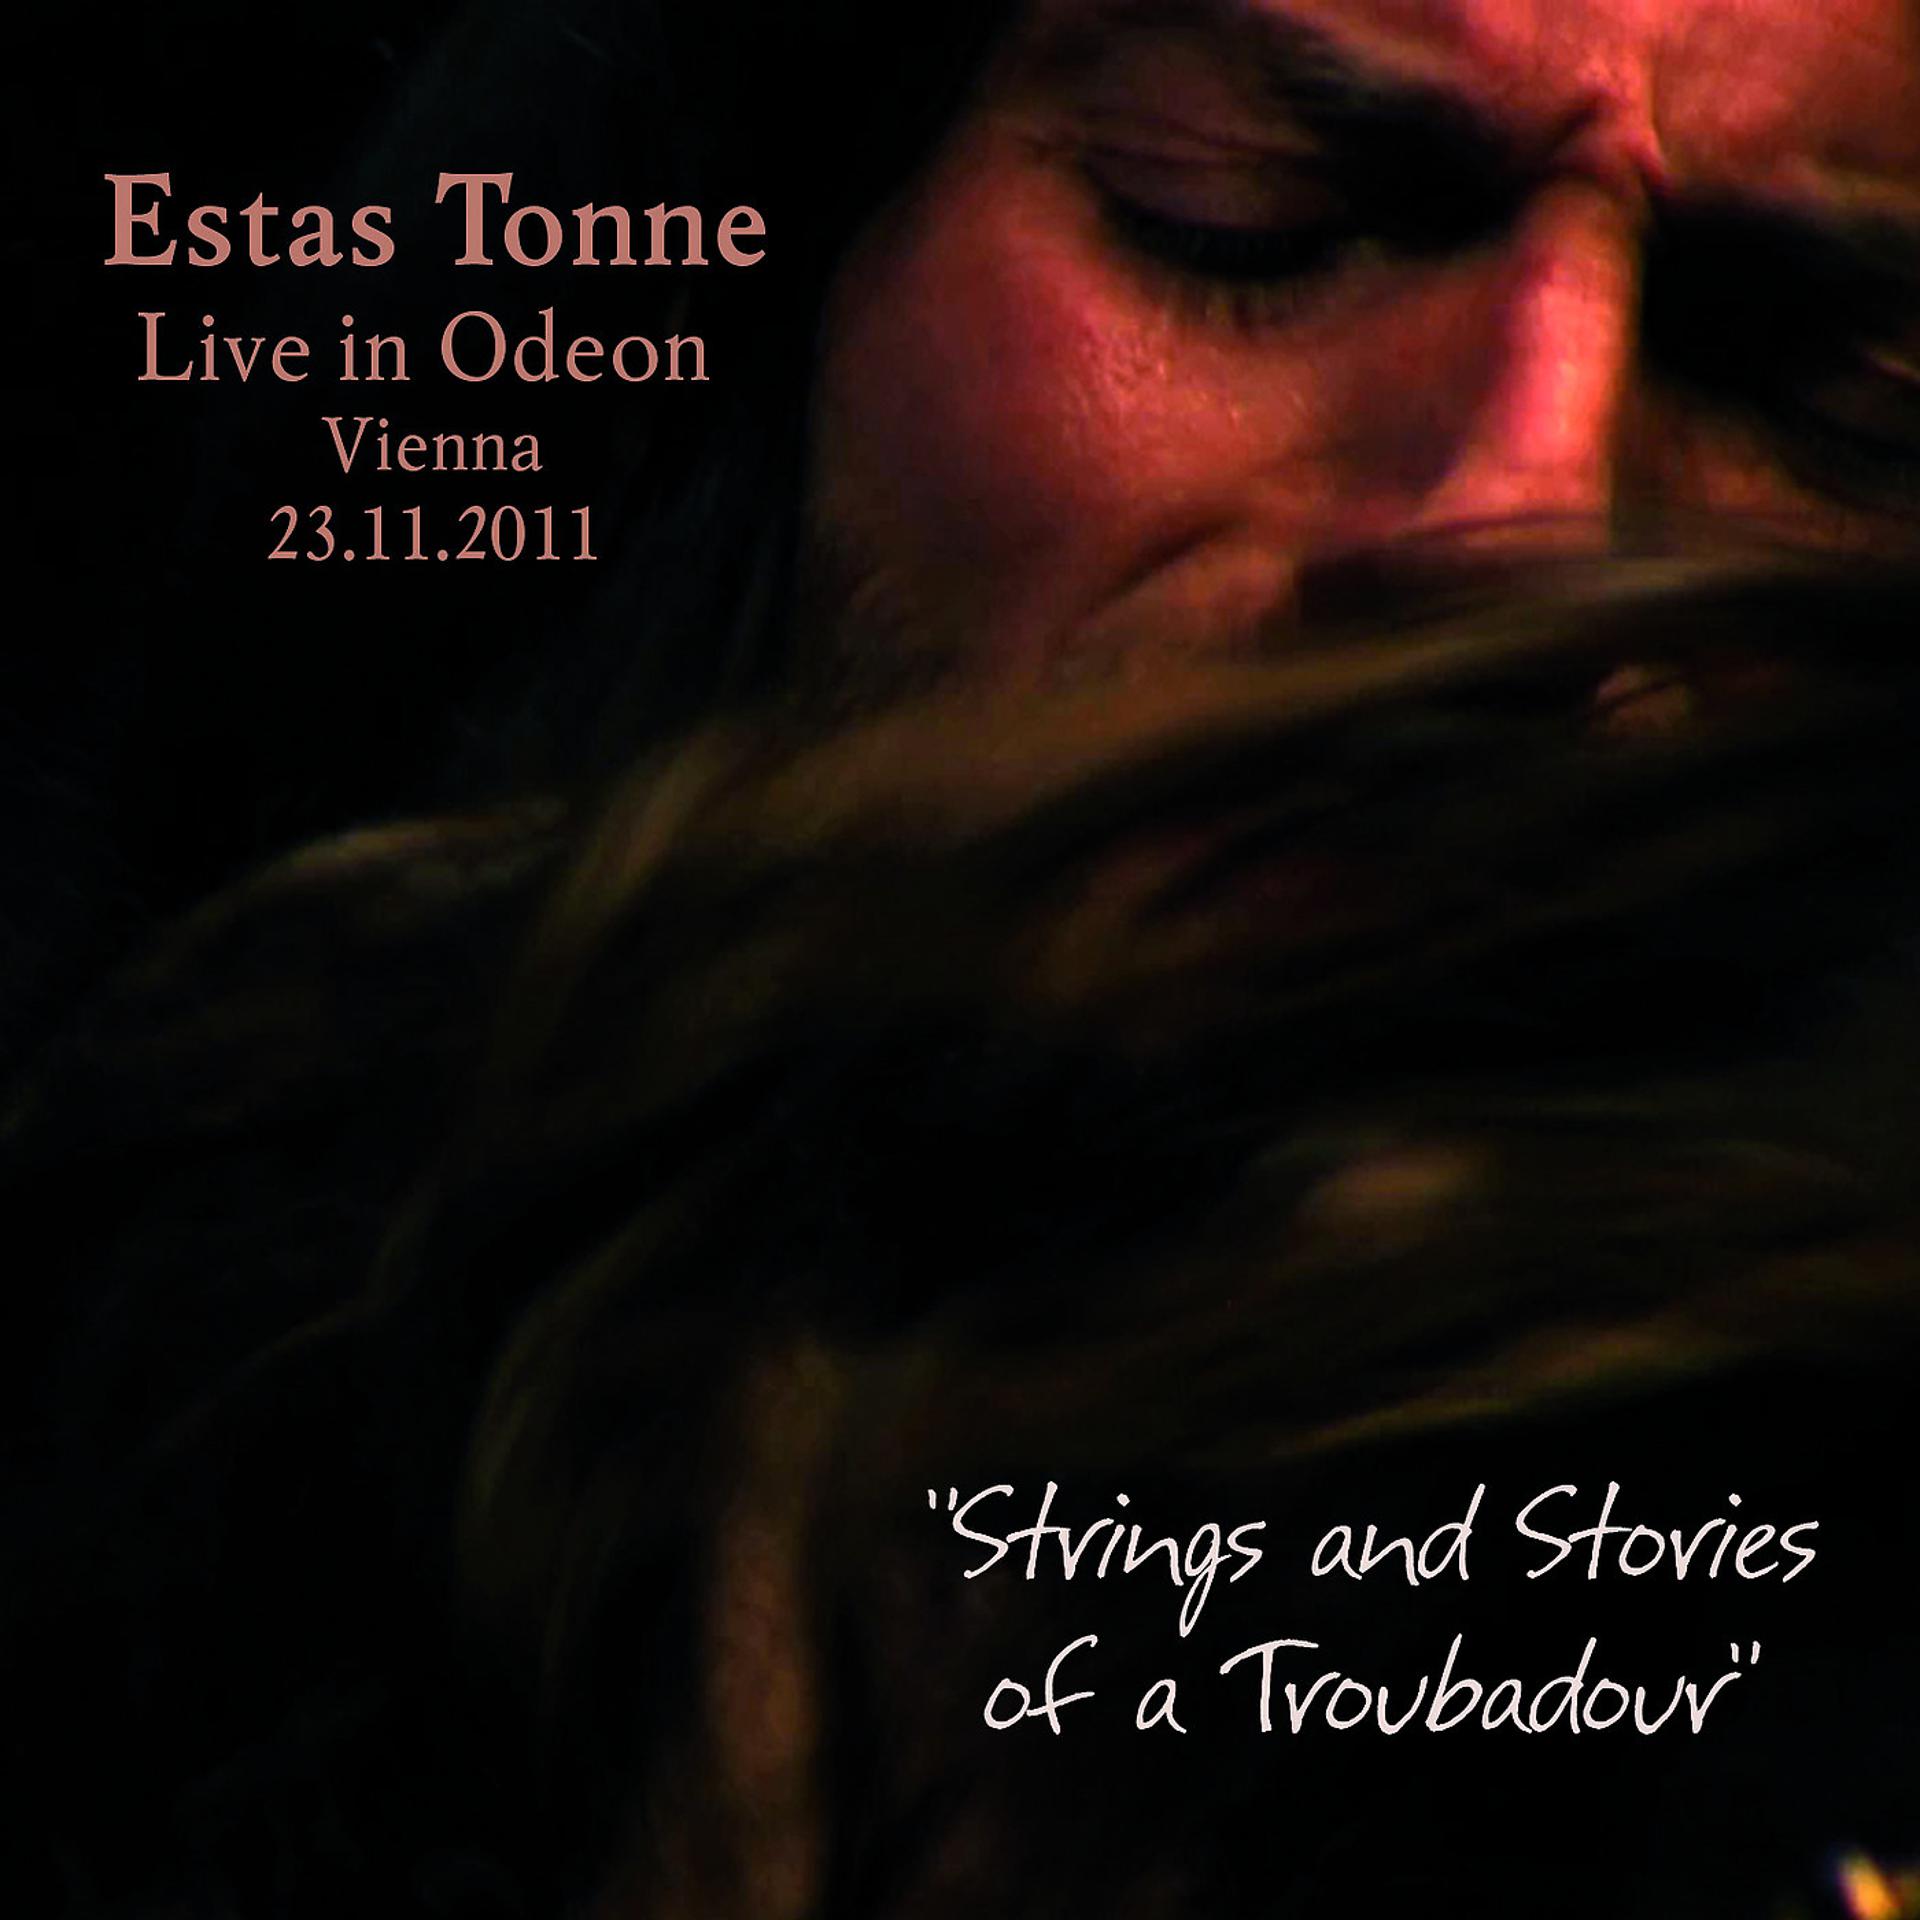 Постер альбома "Strings and Stories of a Troubadour", Live in Odeon, Vienna 2011